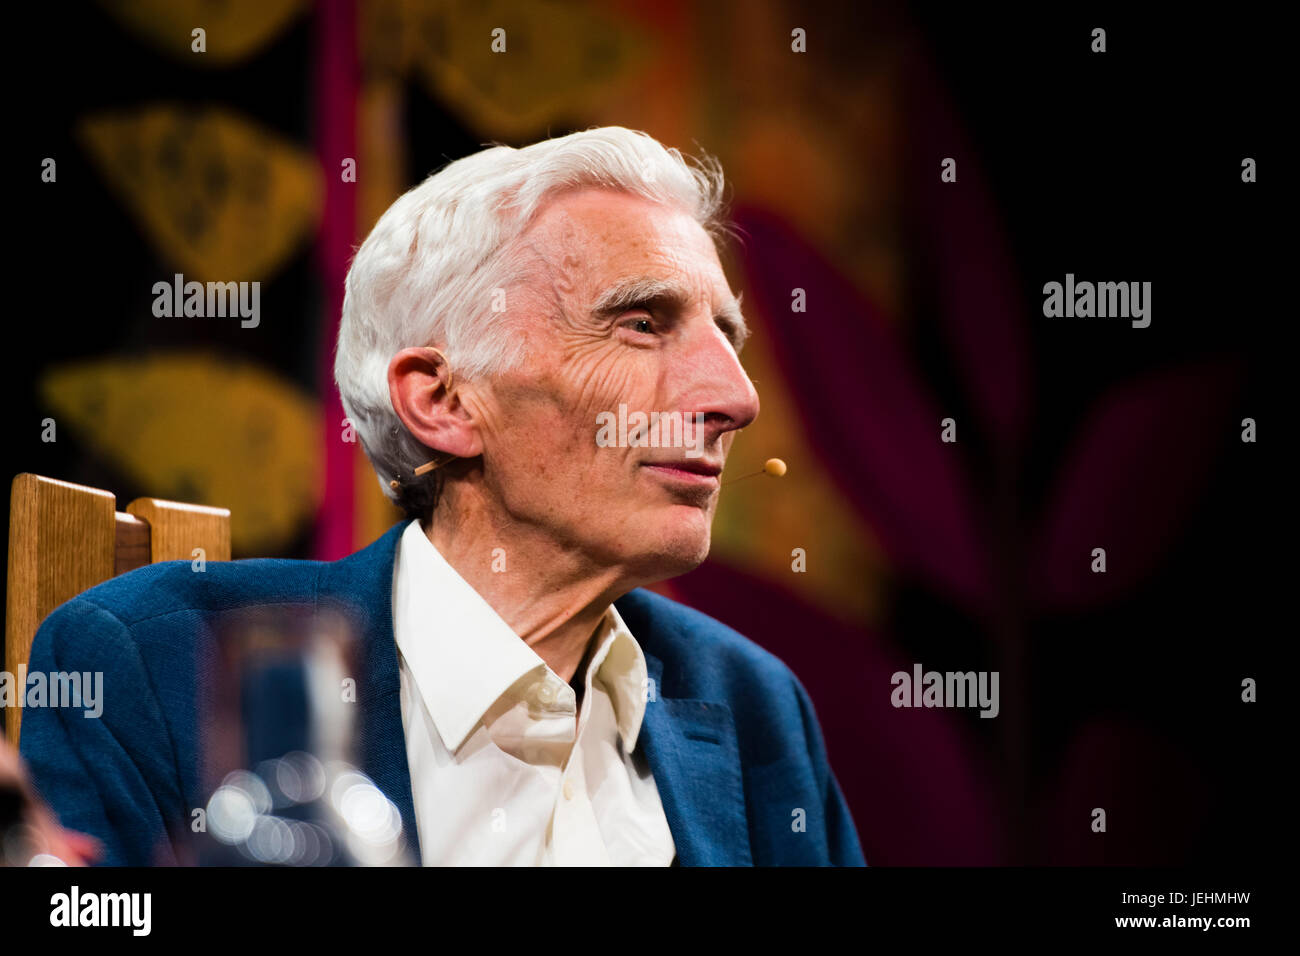 Martin Rees  , Baron Rees of Ludlow, OM, FRS, FREng, FMedSci, FRAS , British cosmologist and astrophysicist,  appearing at the 2017 Hay Festival of Literature and the Arts, Hay on Wye, Wales UK Stock Photo